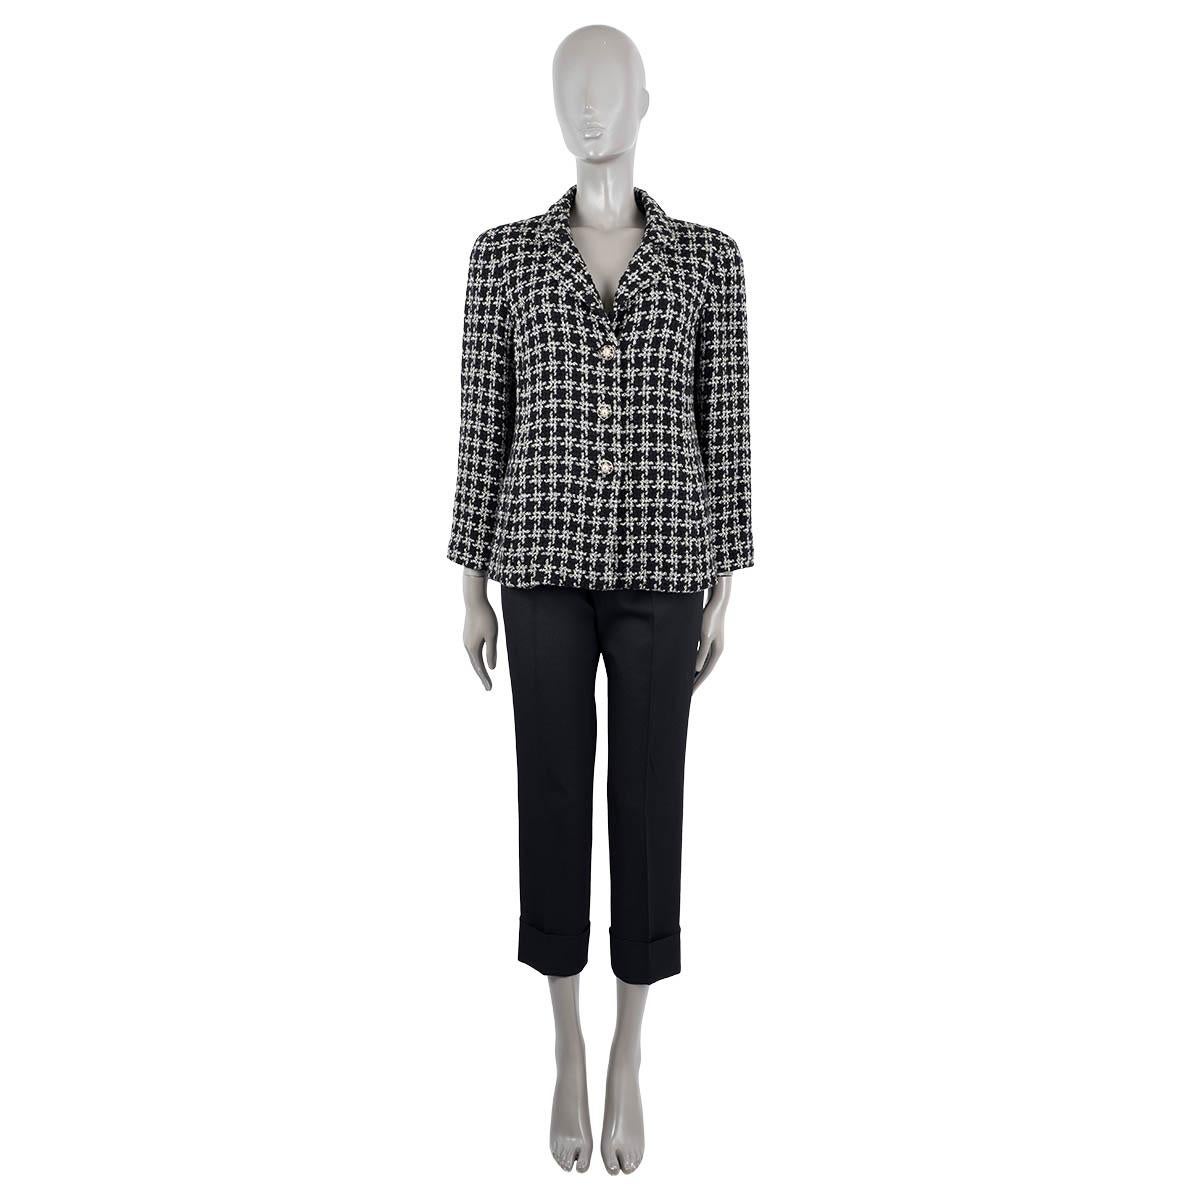 100% authentic Chanel houndstooth tweed jacket in black and white cotton (54%) and silk (46%). Features CC embossed pearl and leather woven chain buttons and a button flap in the back. Lined in silk (100%). Has been worn and is in excellent